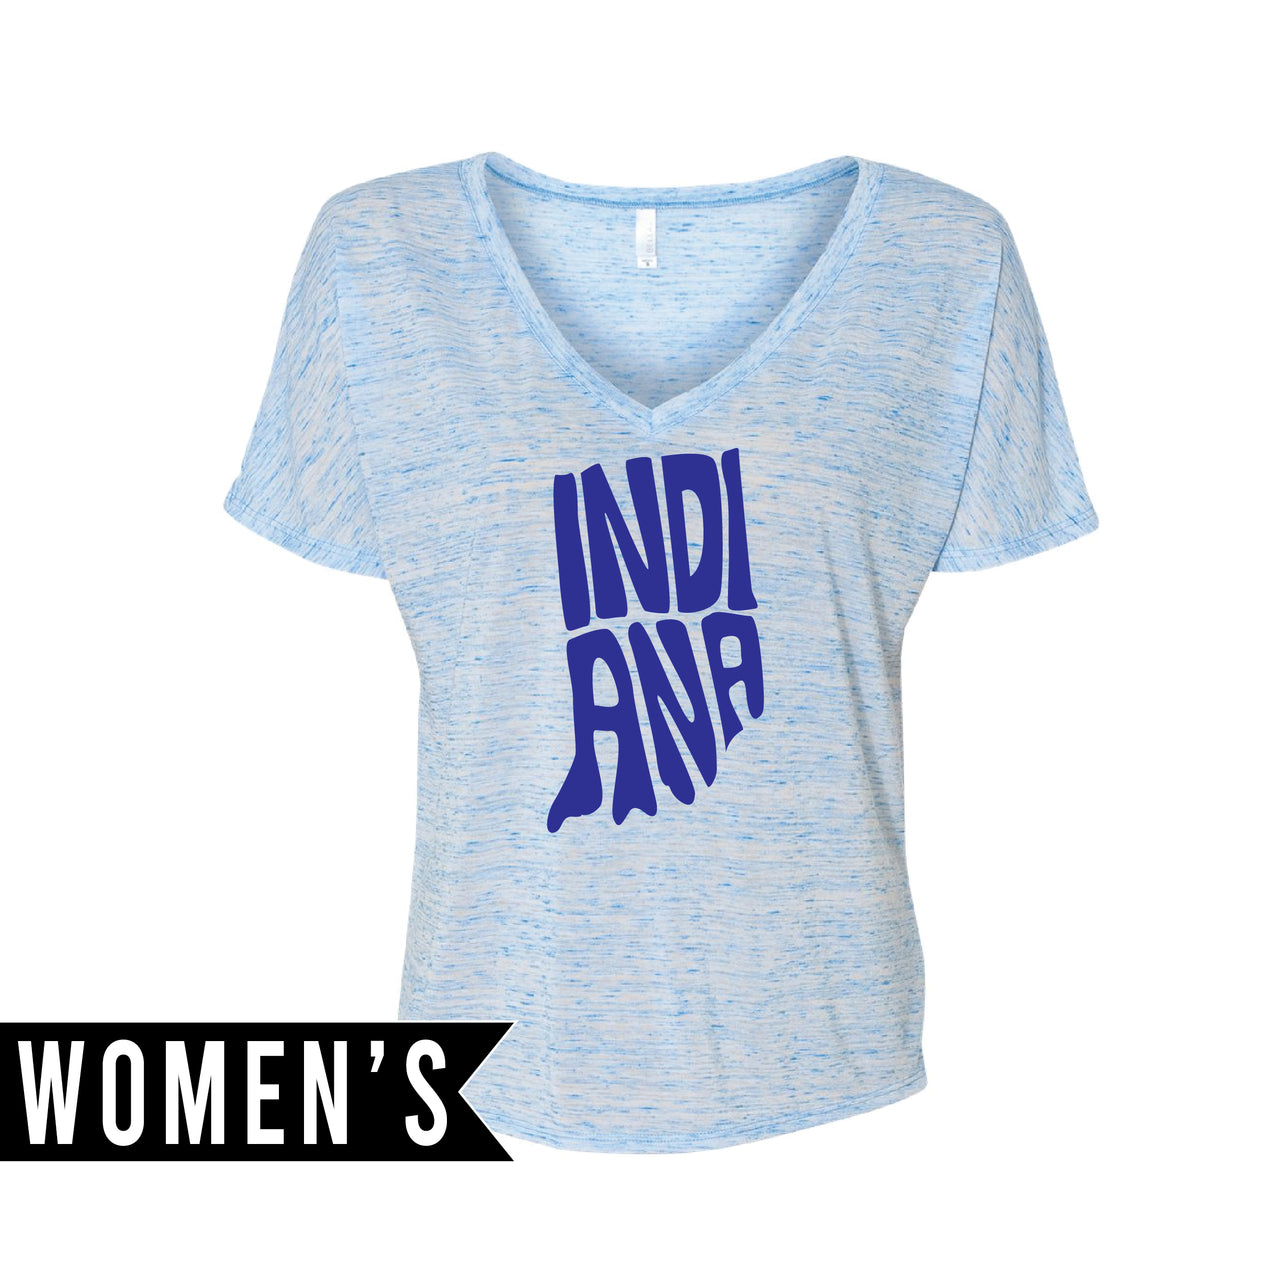 BELLA + CANVAS - Women’s Slouchy V-Neck Tee - Indiana Letter